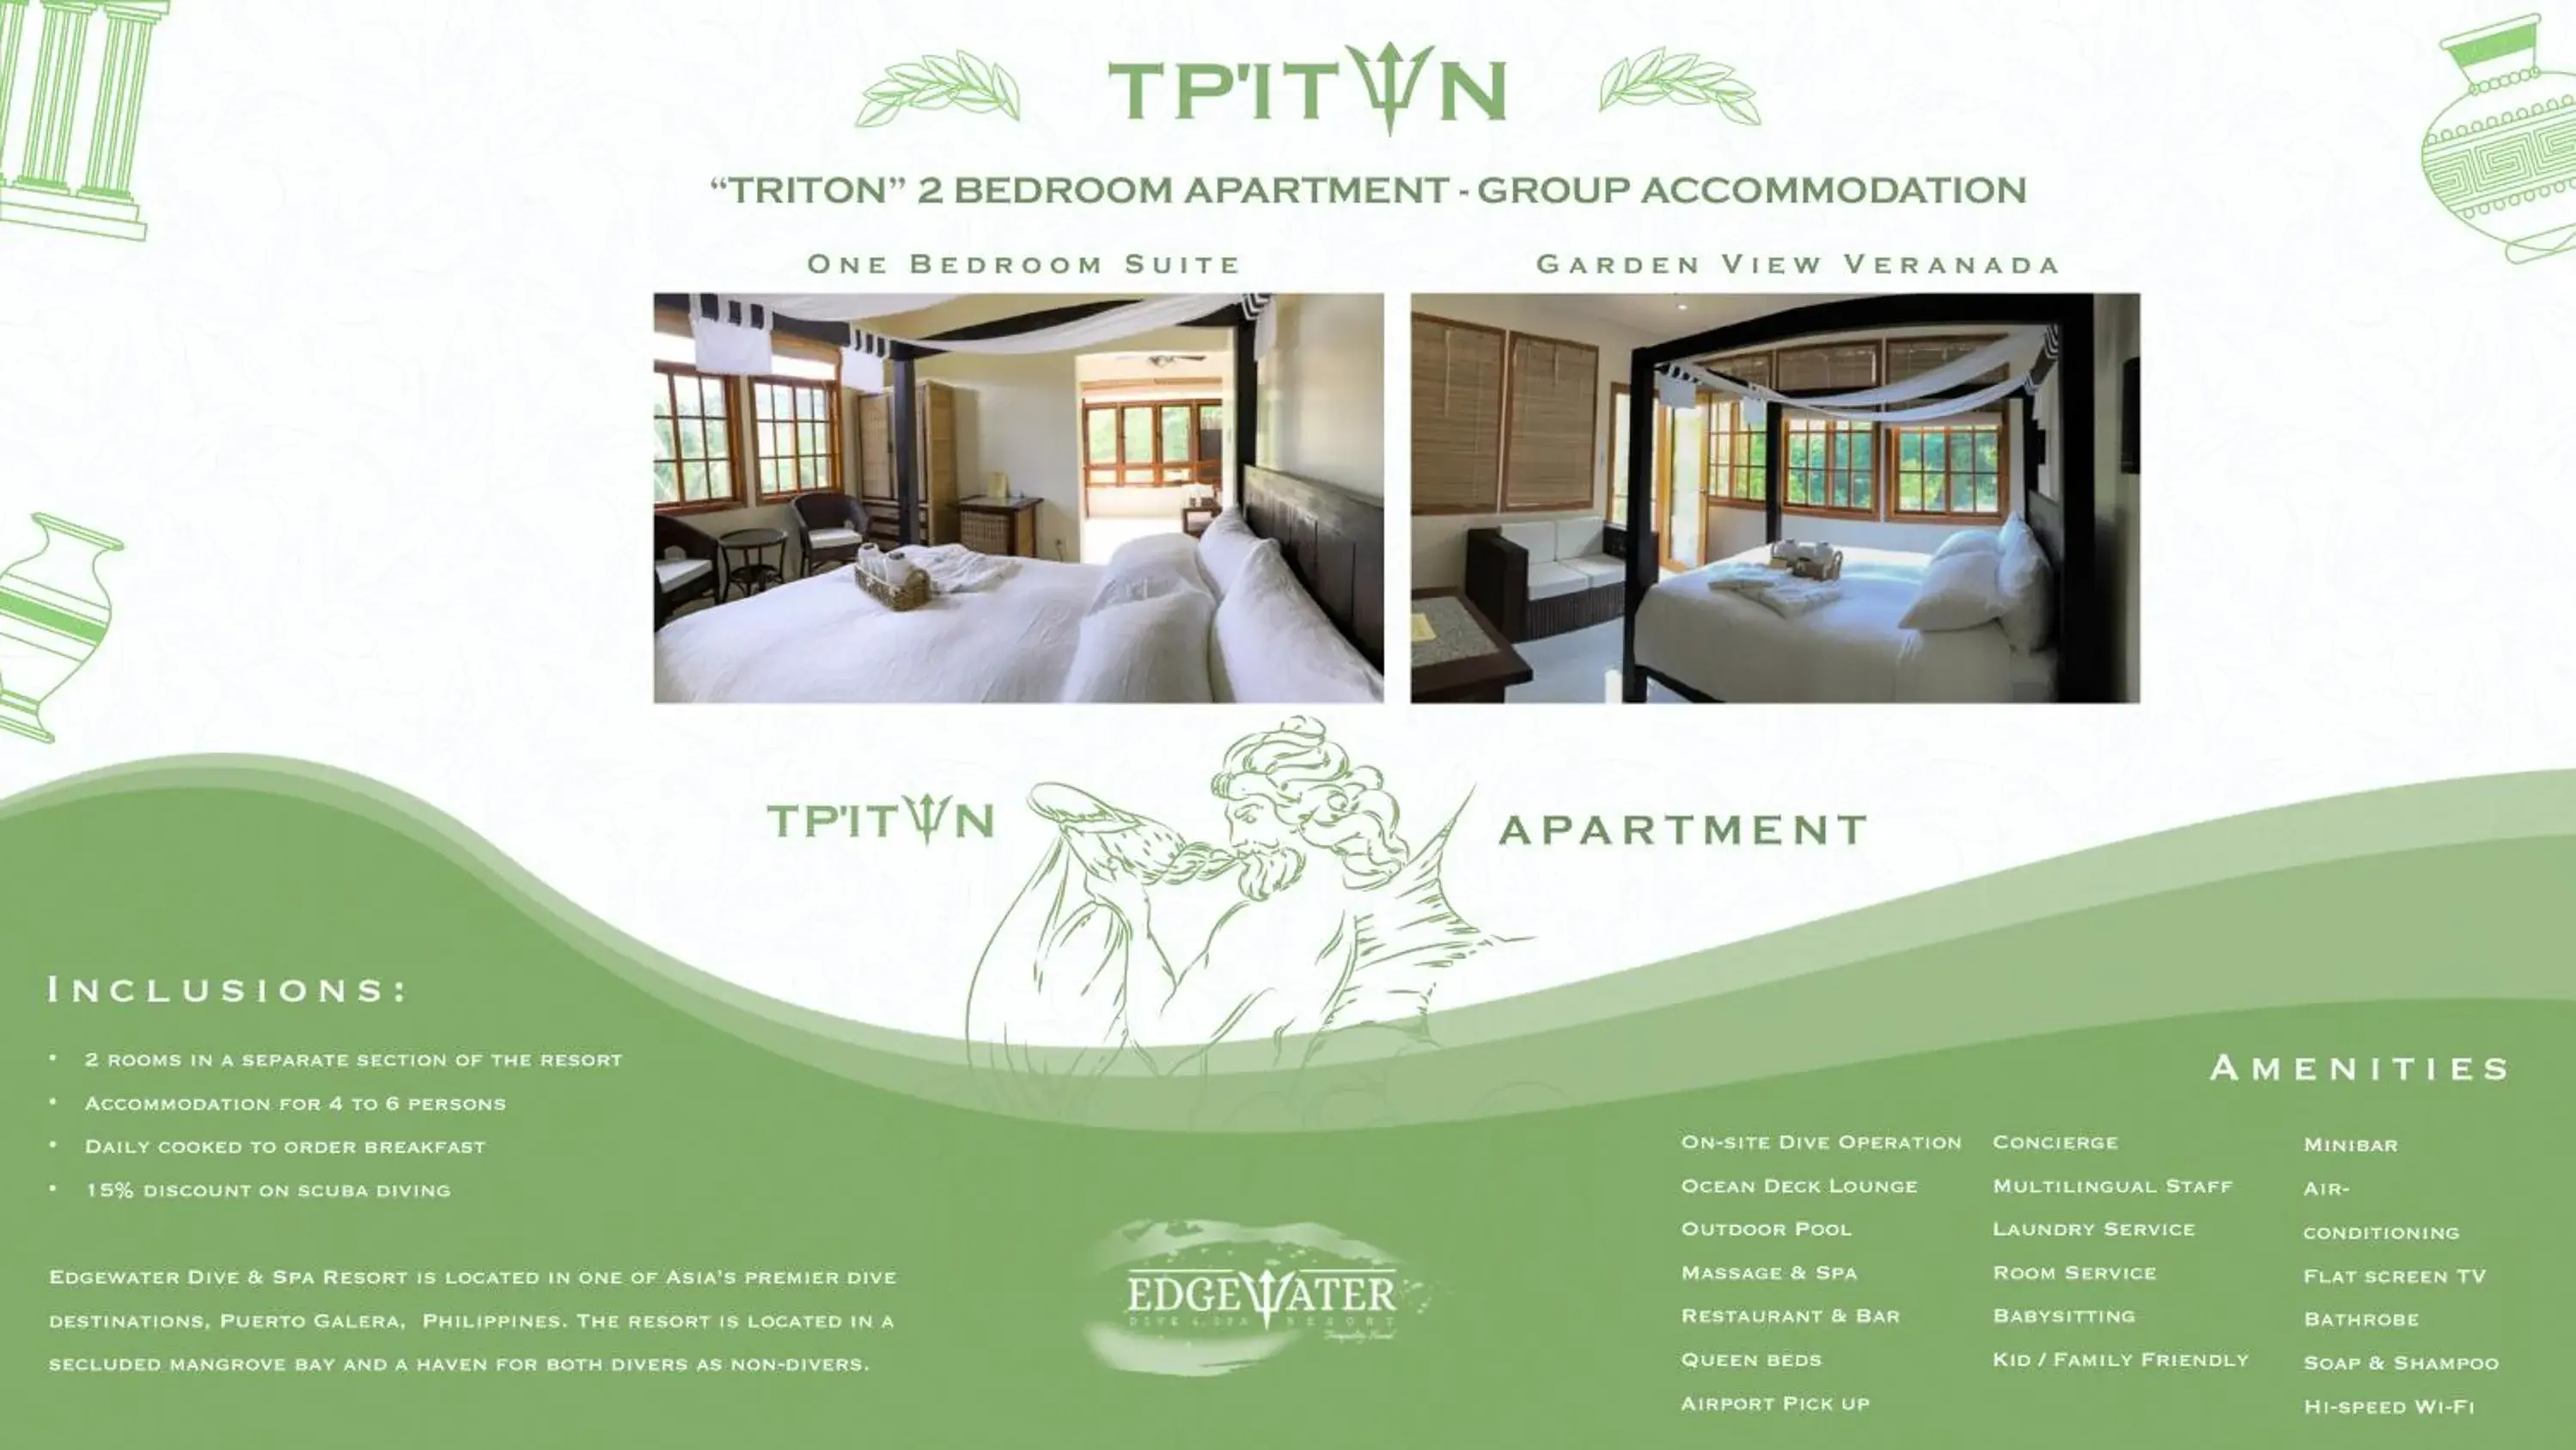 Triton - Two-Bedroom Apartment in Edgewater Dive & Spa Resort